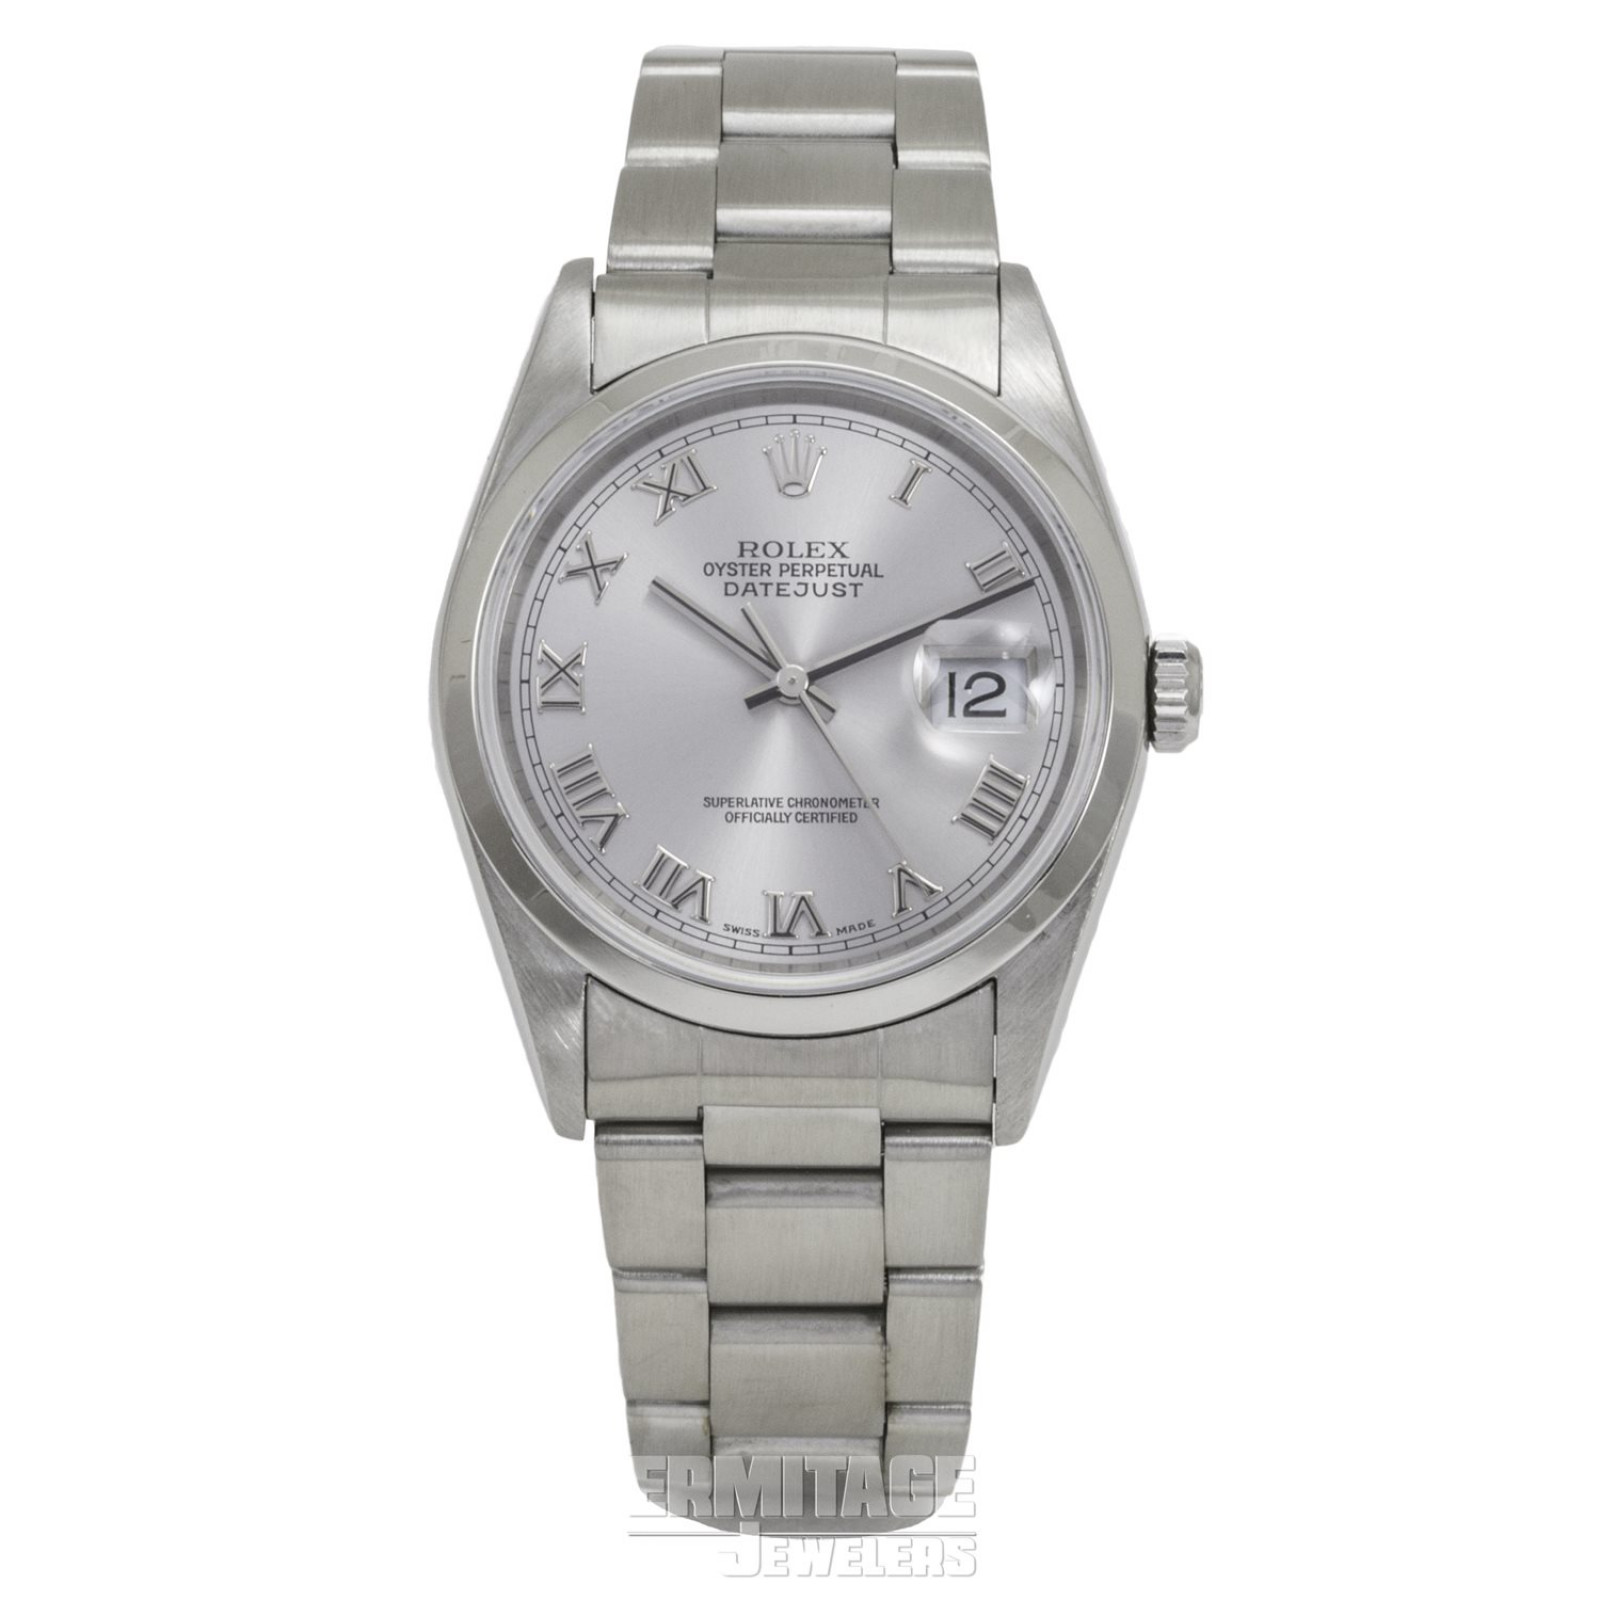 Steel on Oyster Rolex Datejust 16200 36 mm